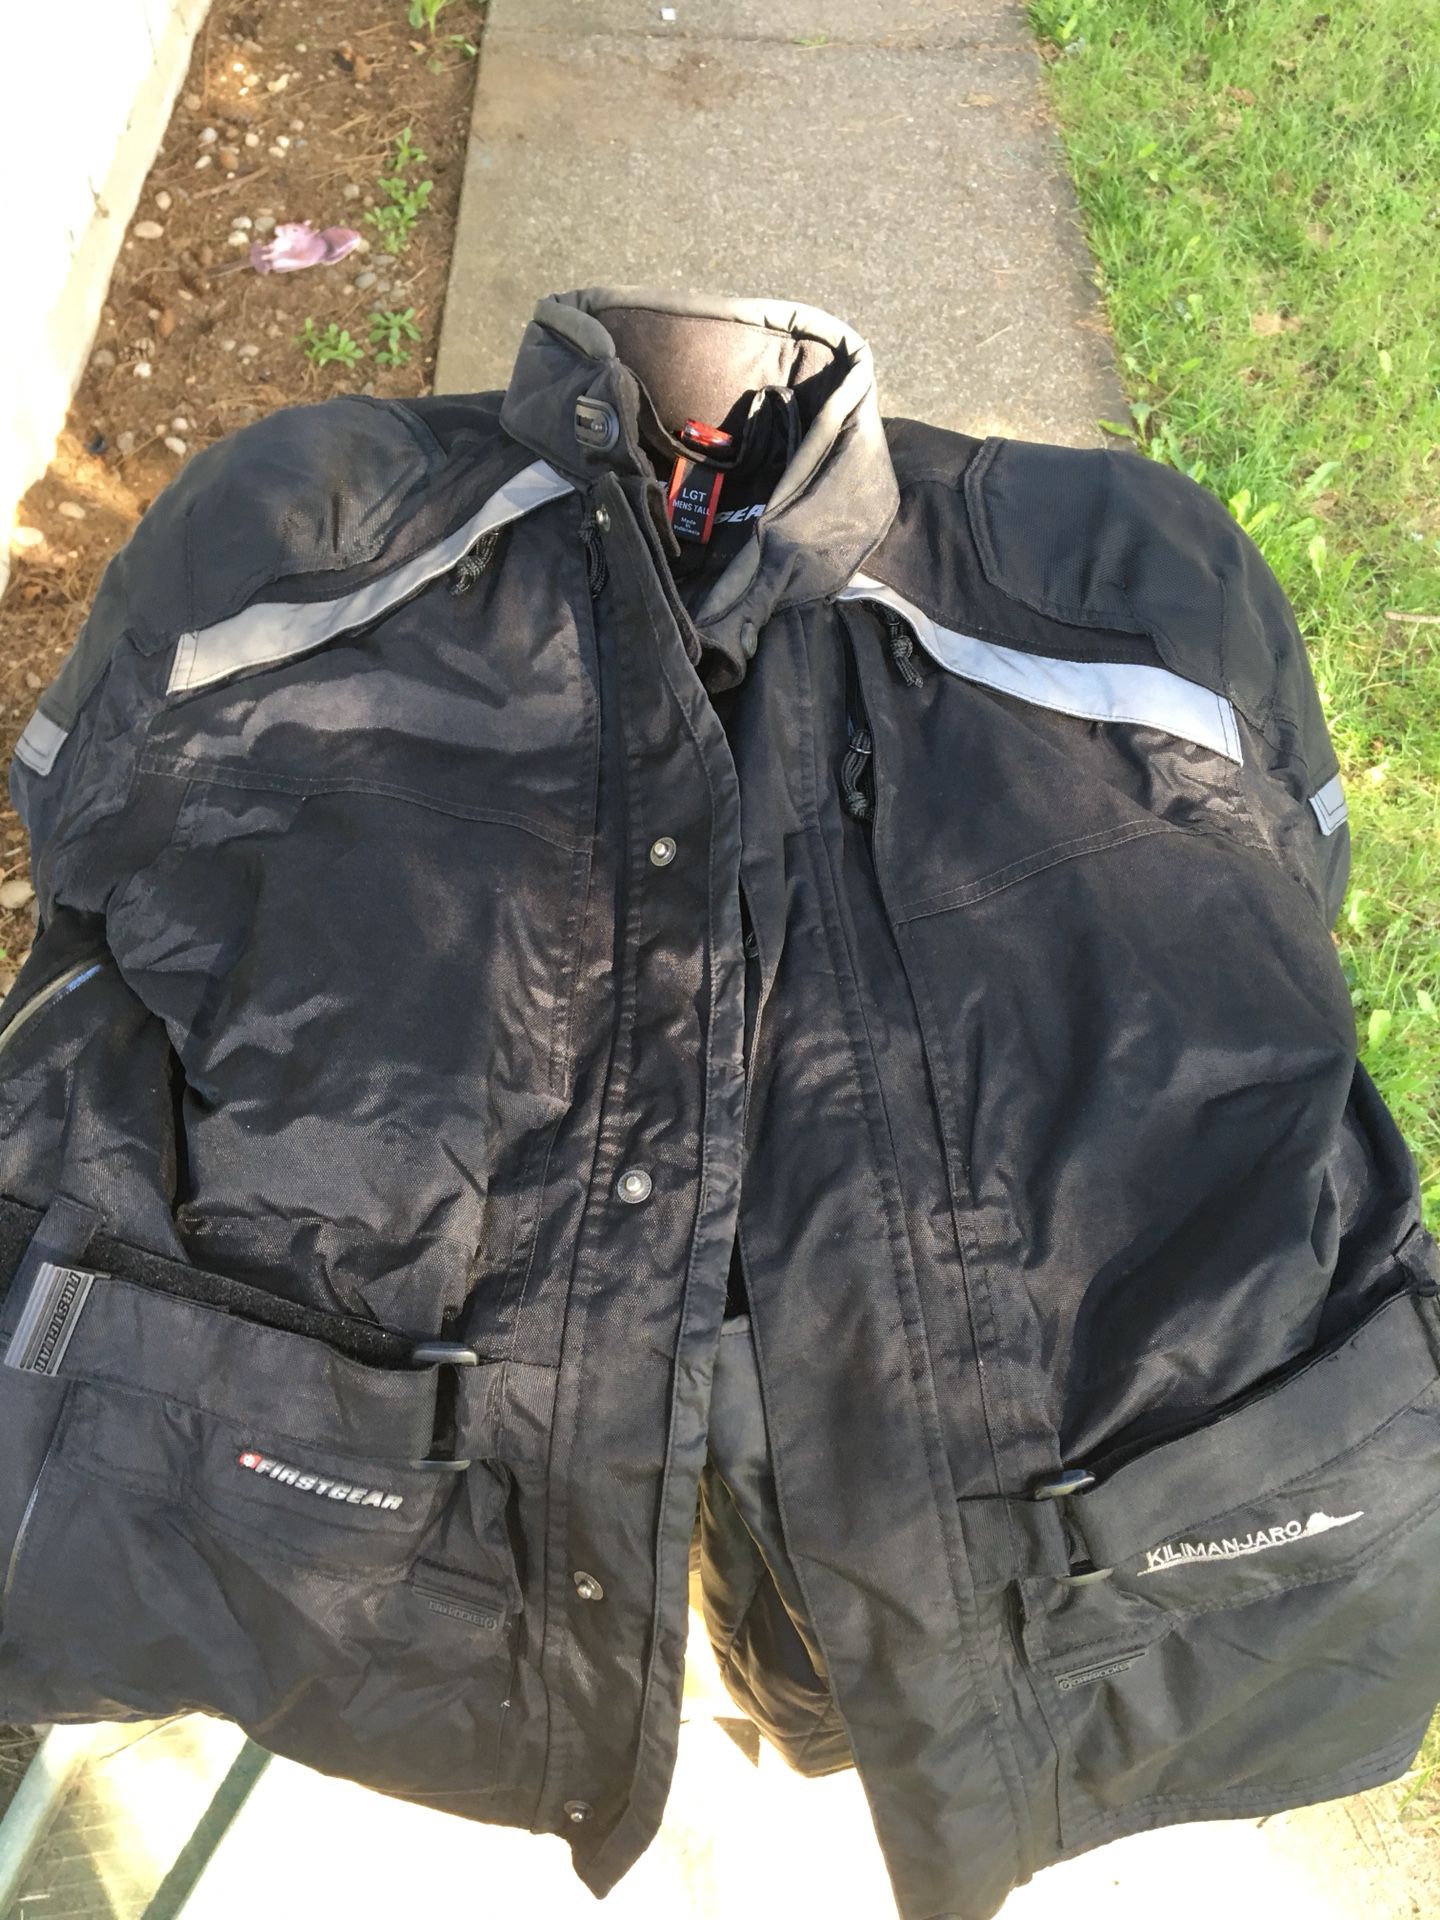 Motorcycle jacket Firstgear*Priced Right!*